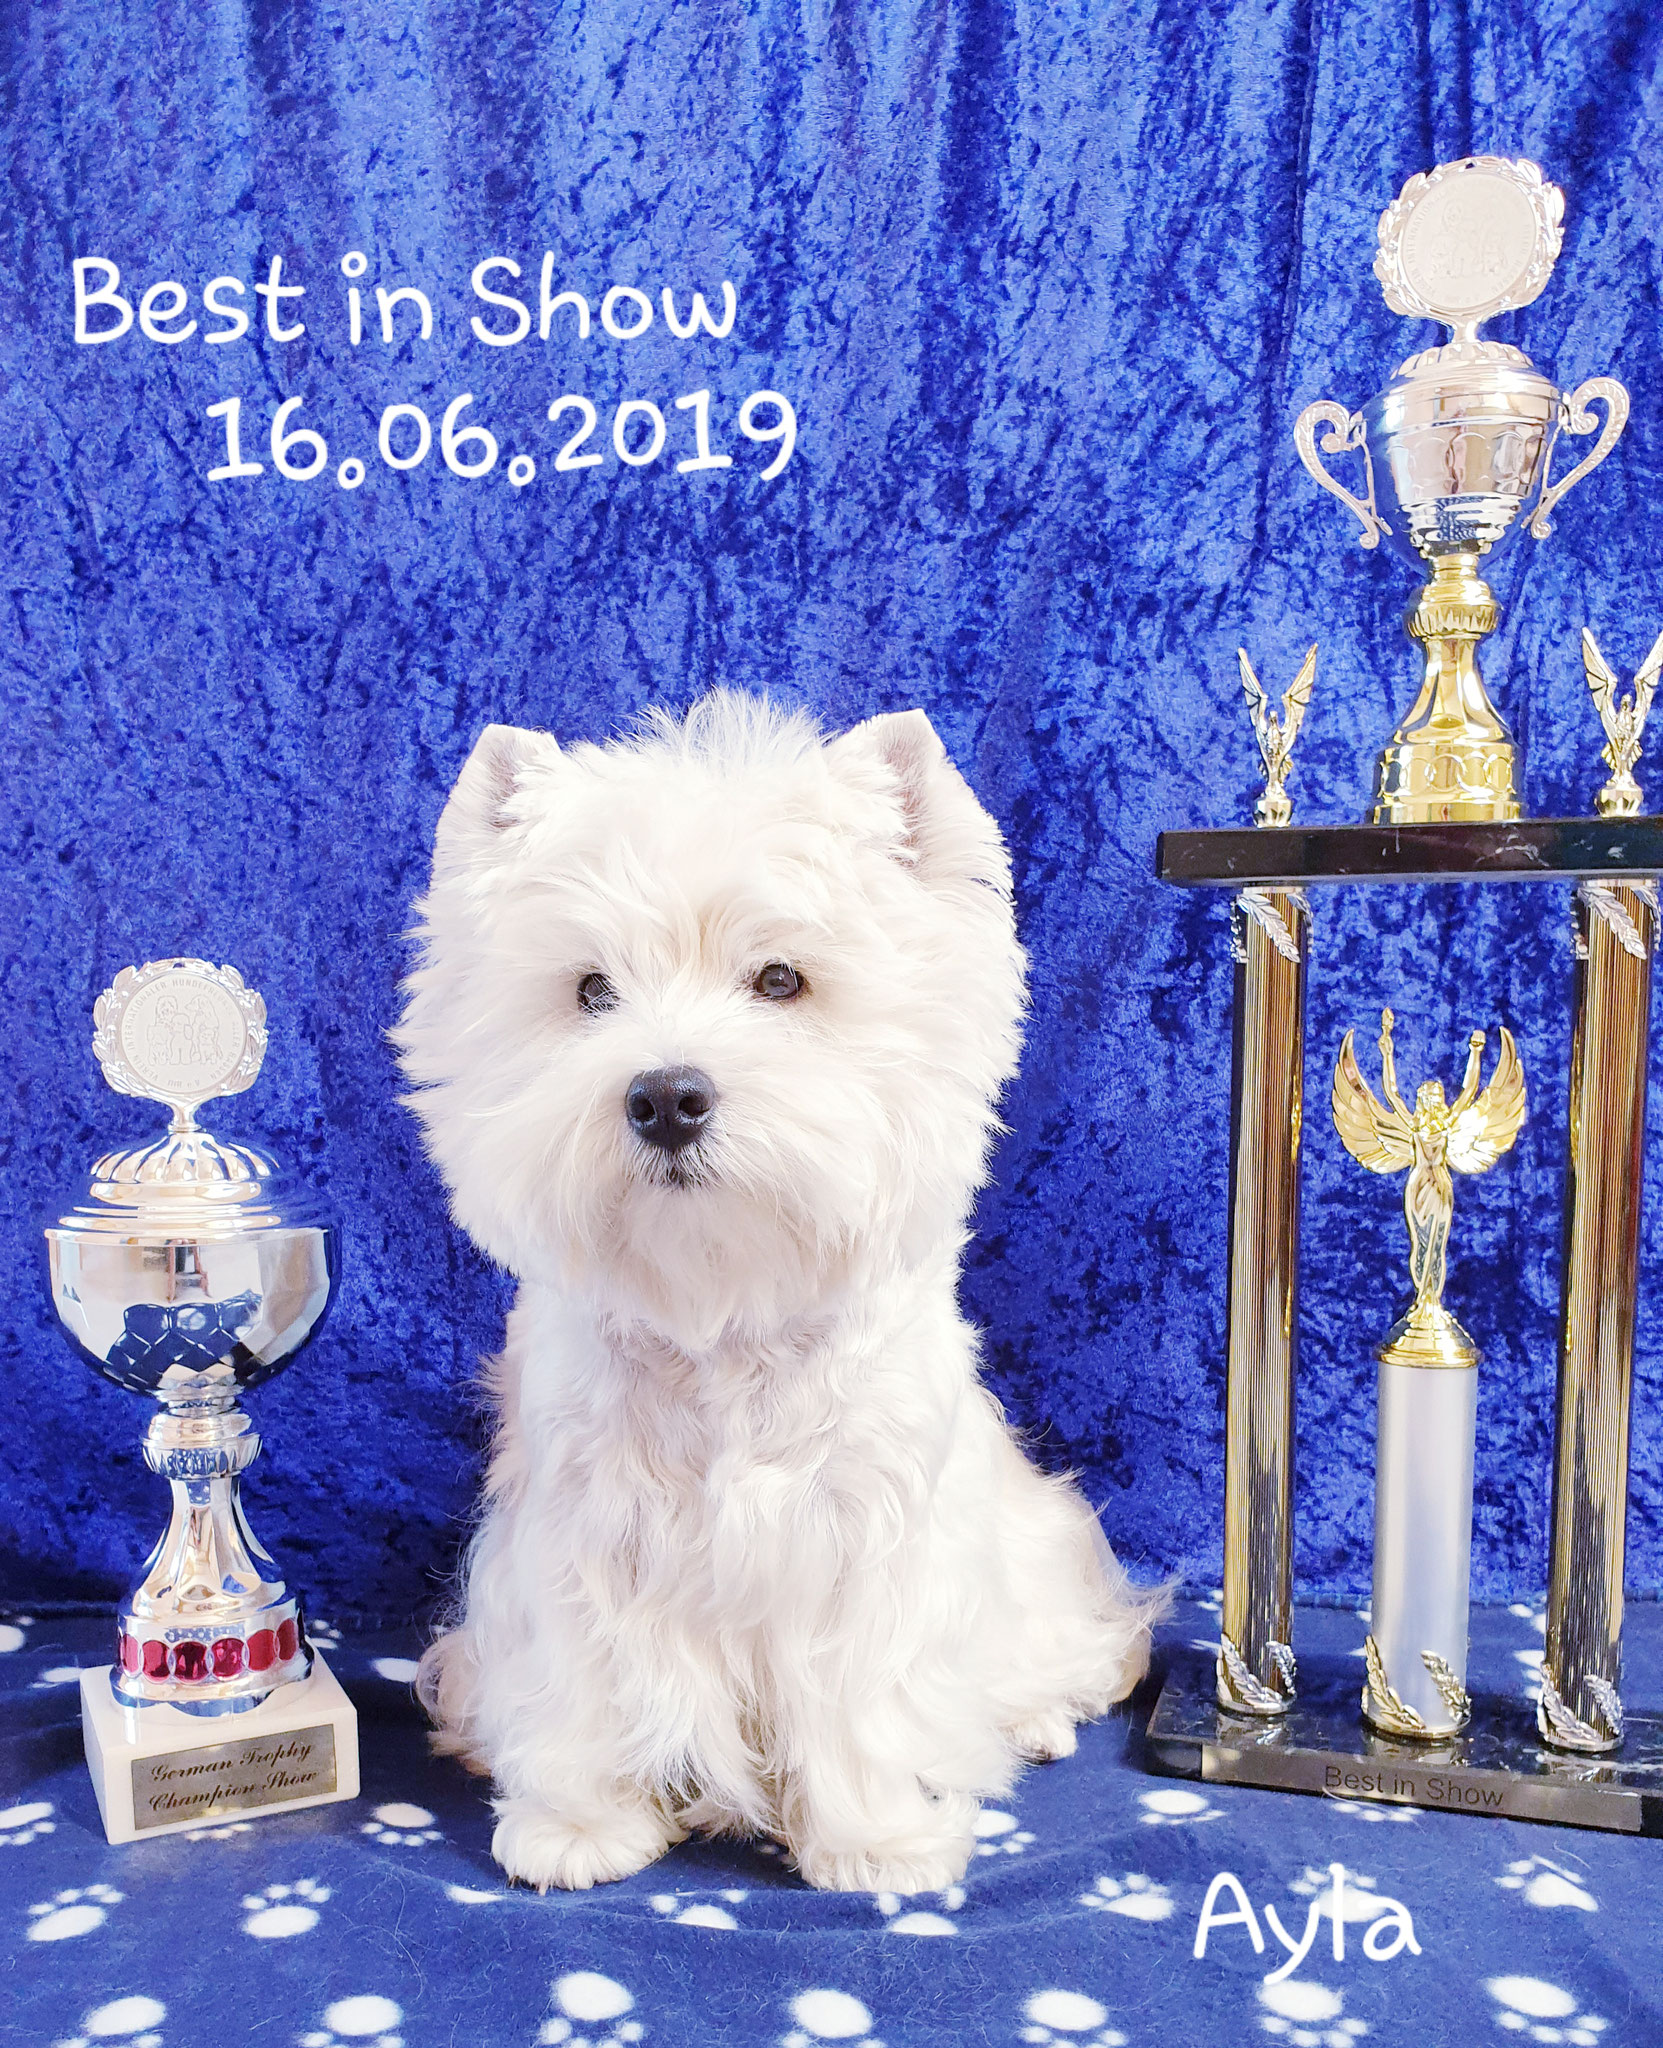 Ayla "Best in Show" am 16.06.2019